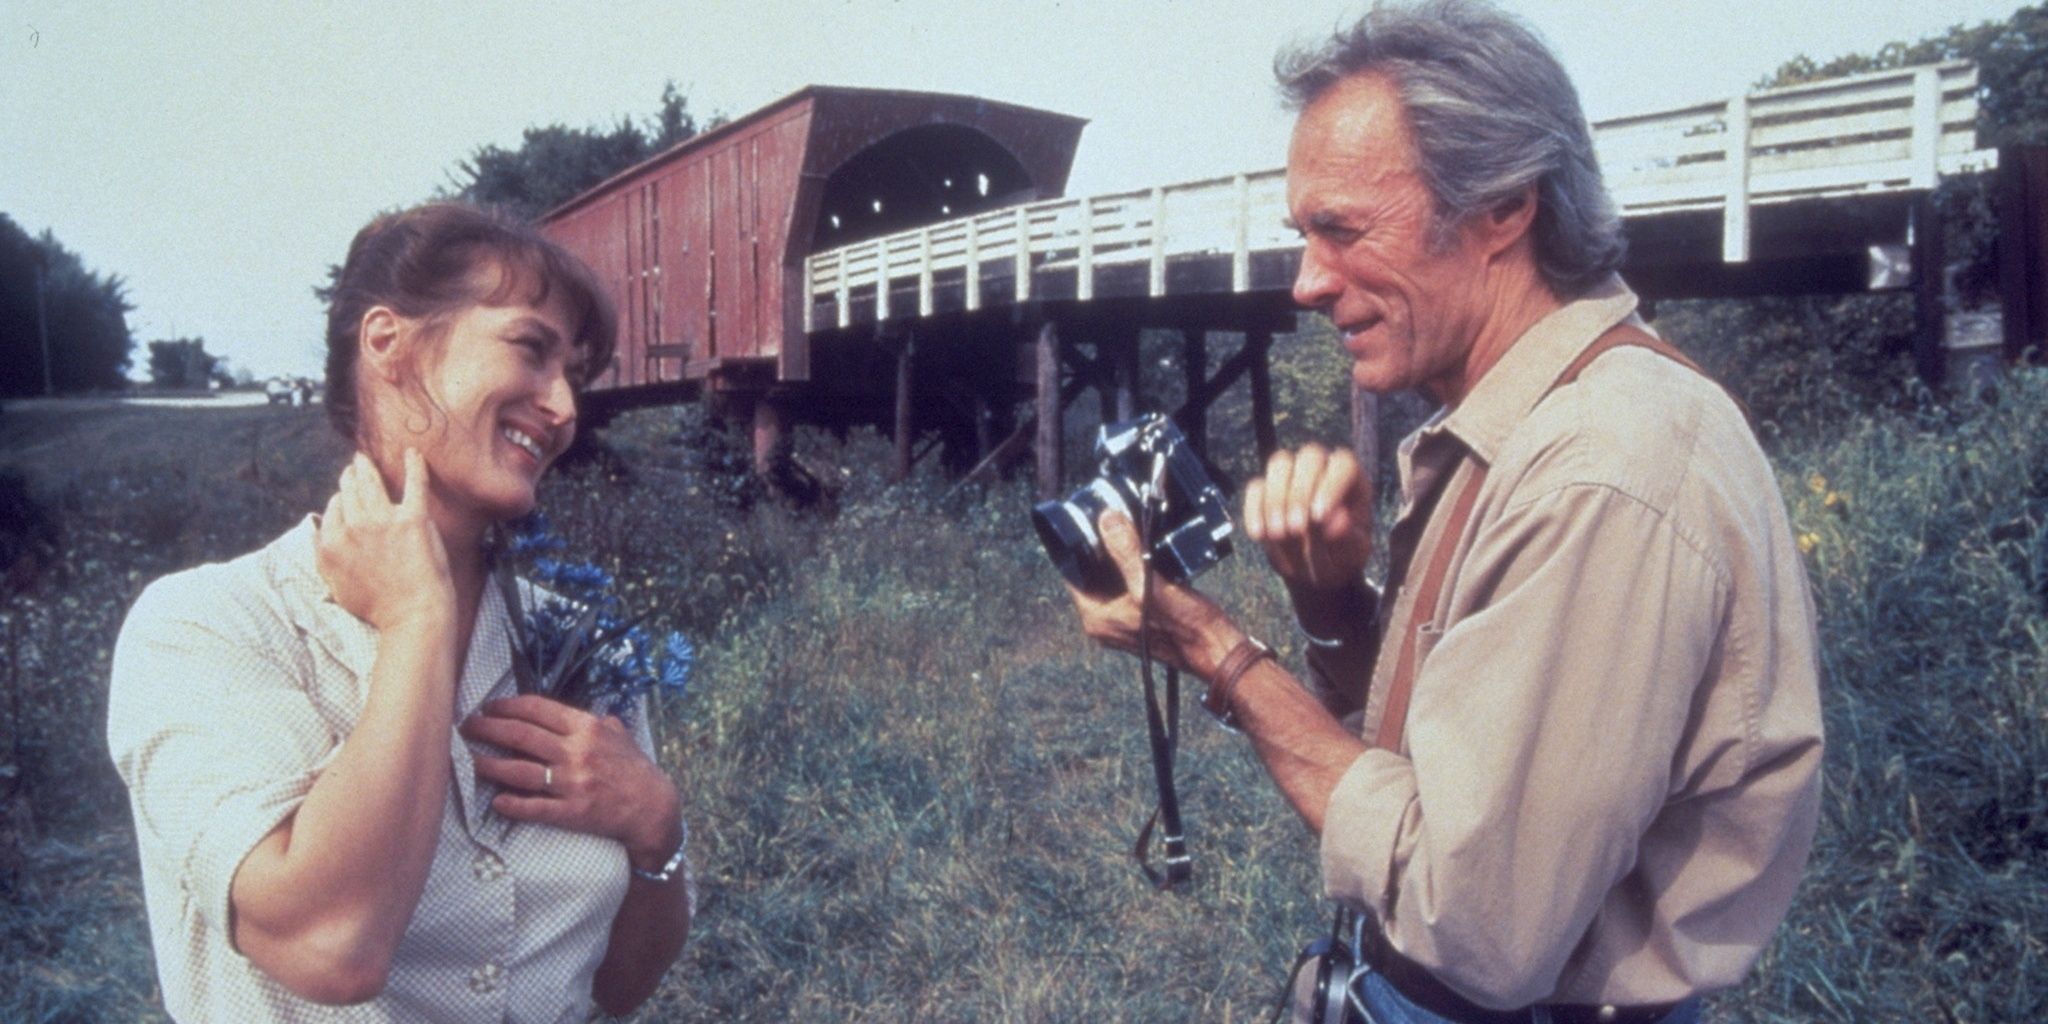 Clint Eastwood taking a picture of Meryl Streep in The Bridges Of Madison County